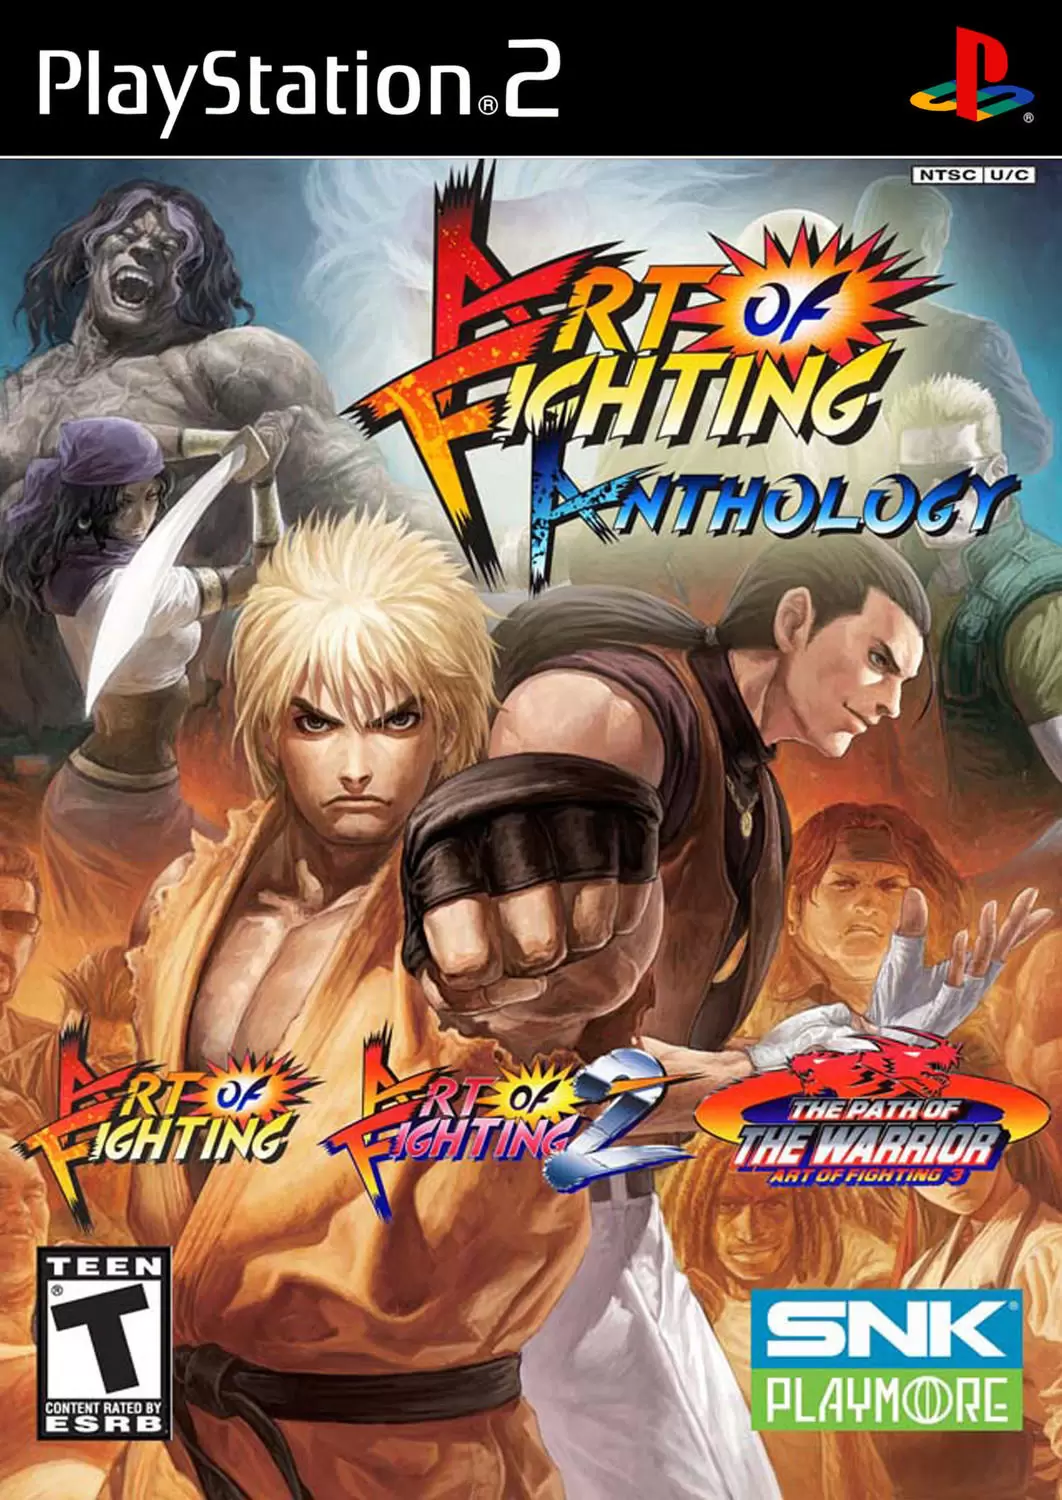 PS2 Games - Art of Fighting Anthology